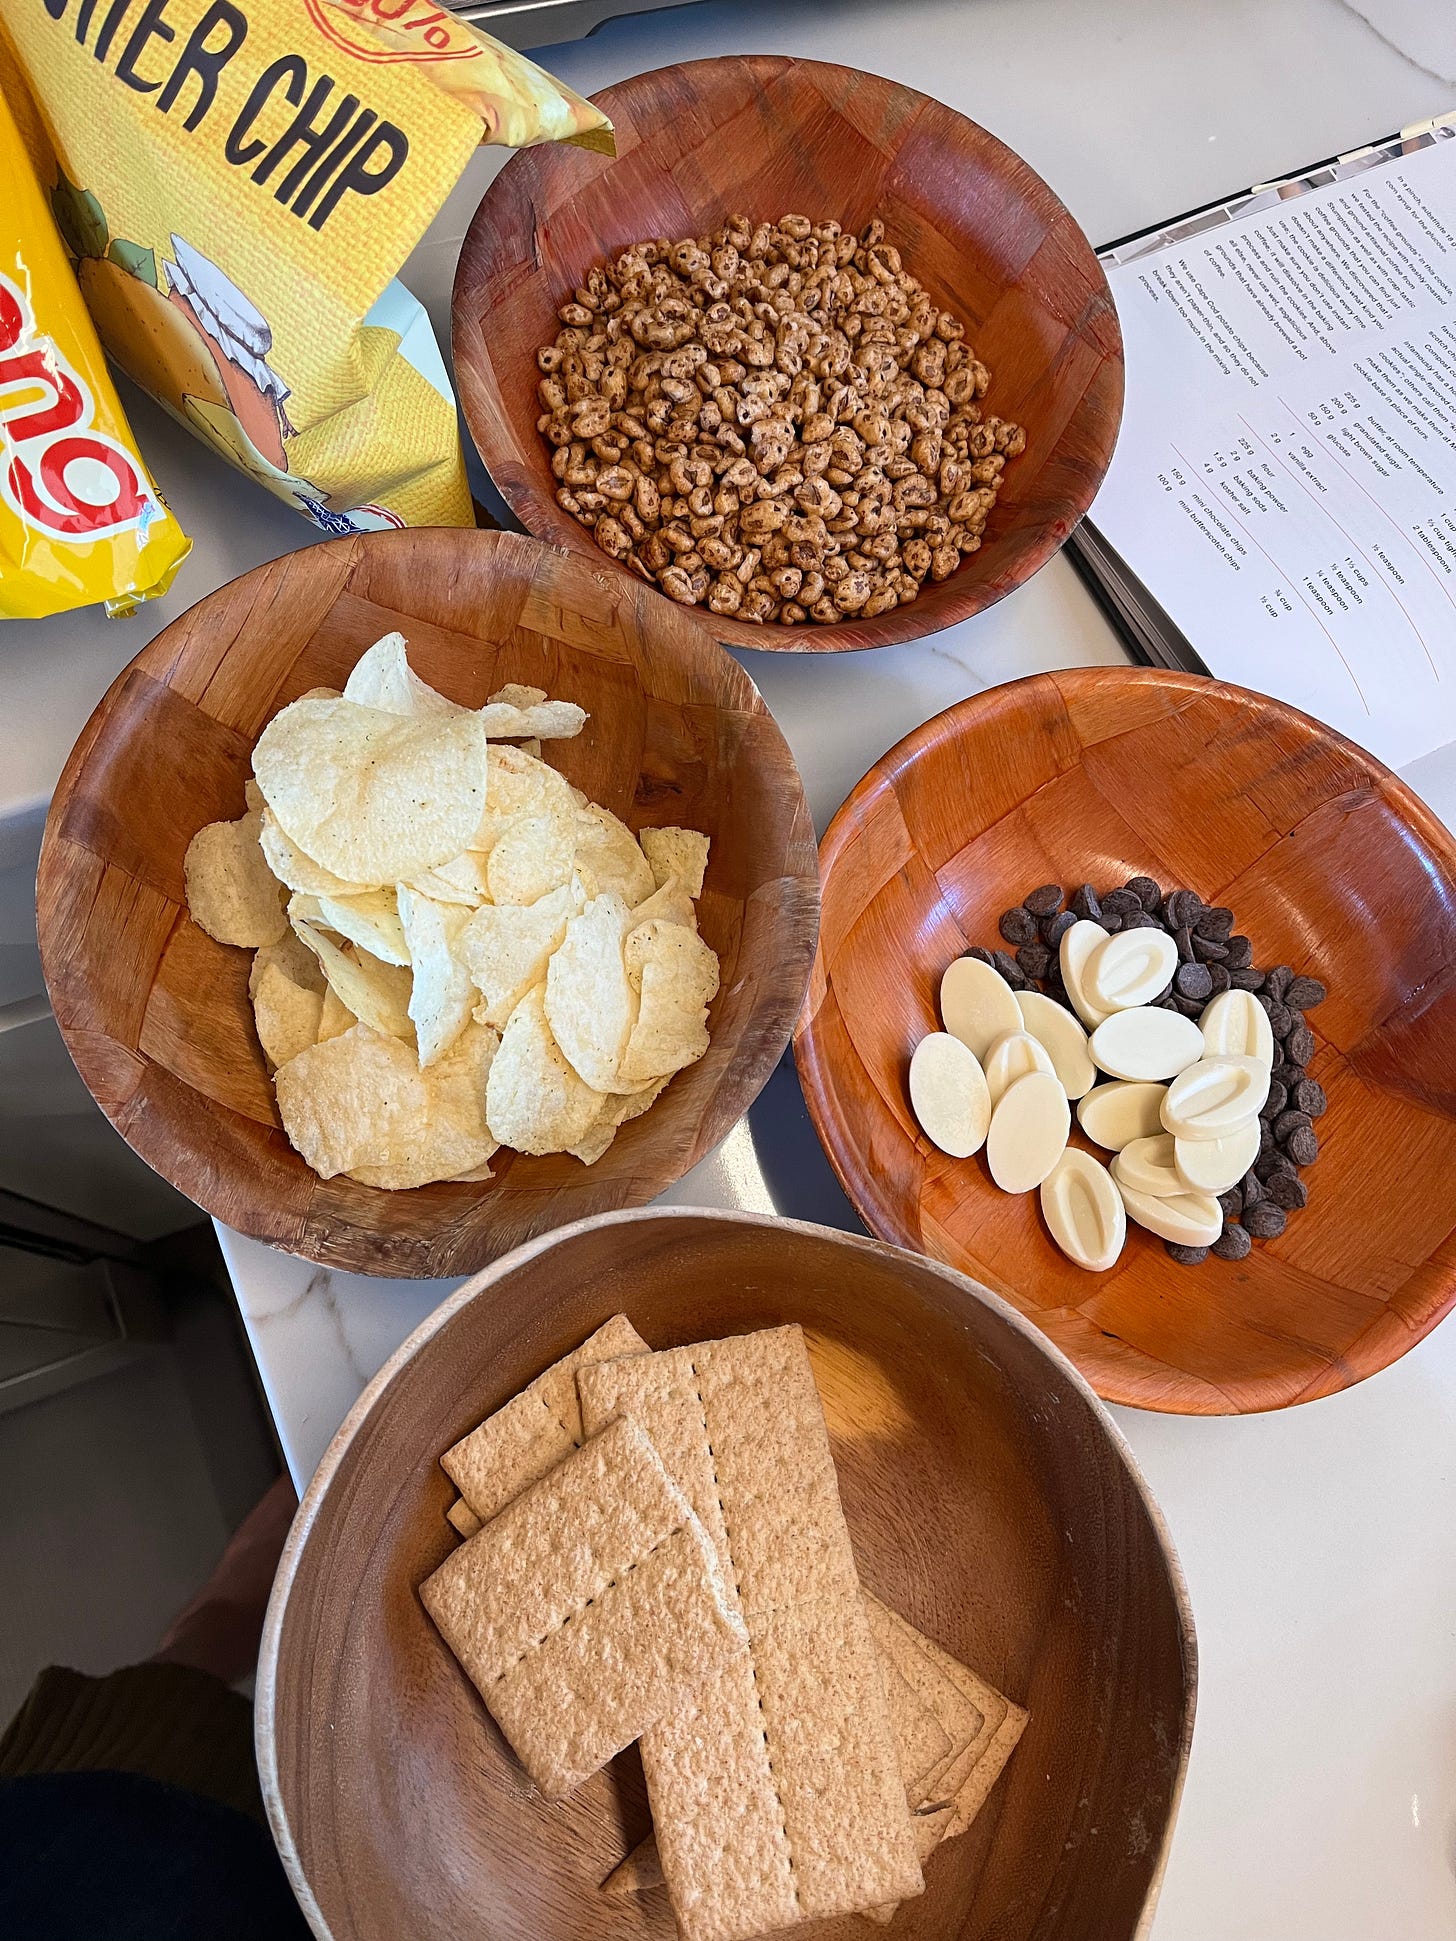 A kitchen counter with bowls filled with snacks: Jolly Pong puffed grain snacks, potato chips, chocolate chips, and graham crackers.